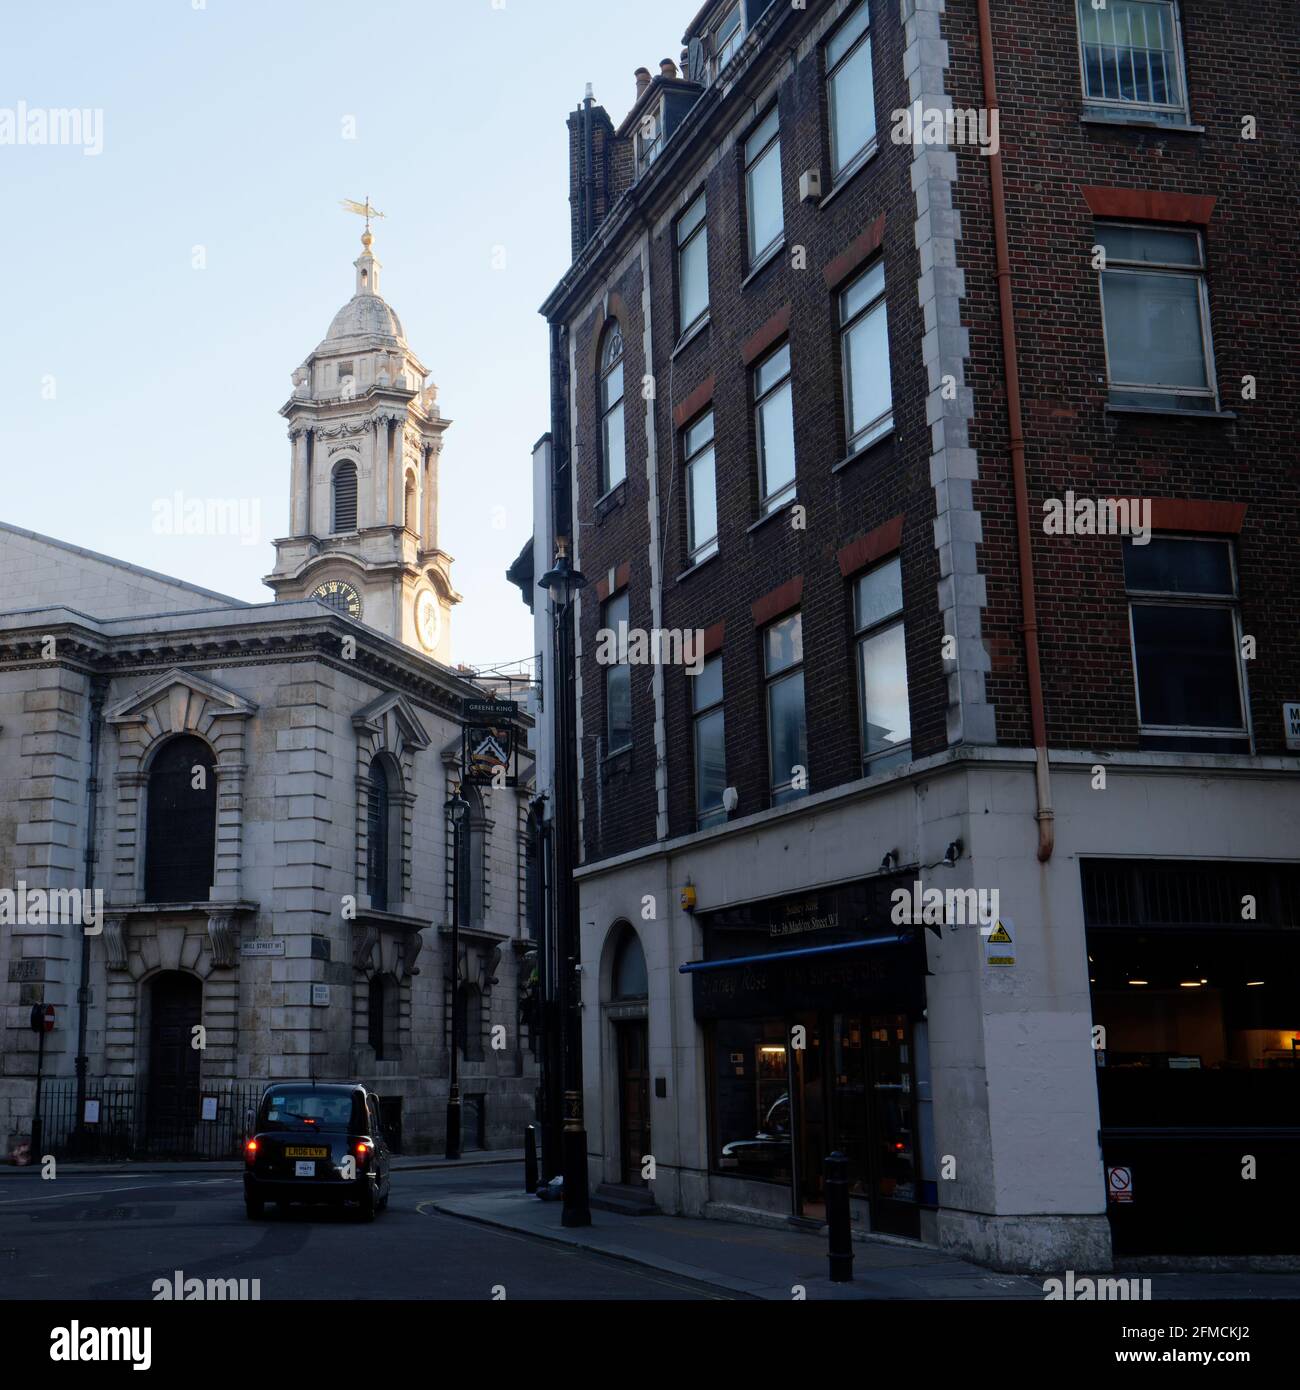 London, Greater London, England - May 04 2021: Taxi stops at a junction on Maddox Street in the evening outside of St George's Church Stock Photo